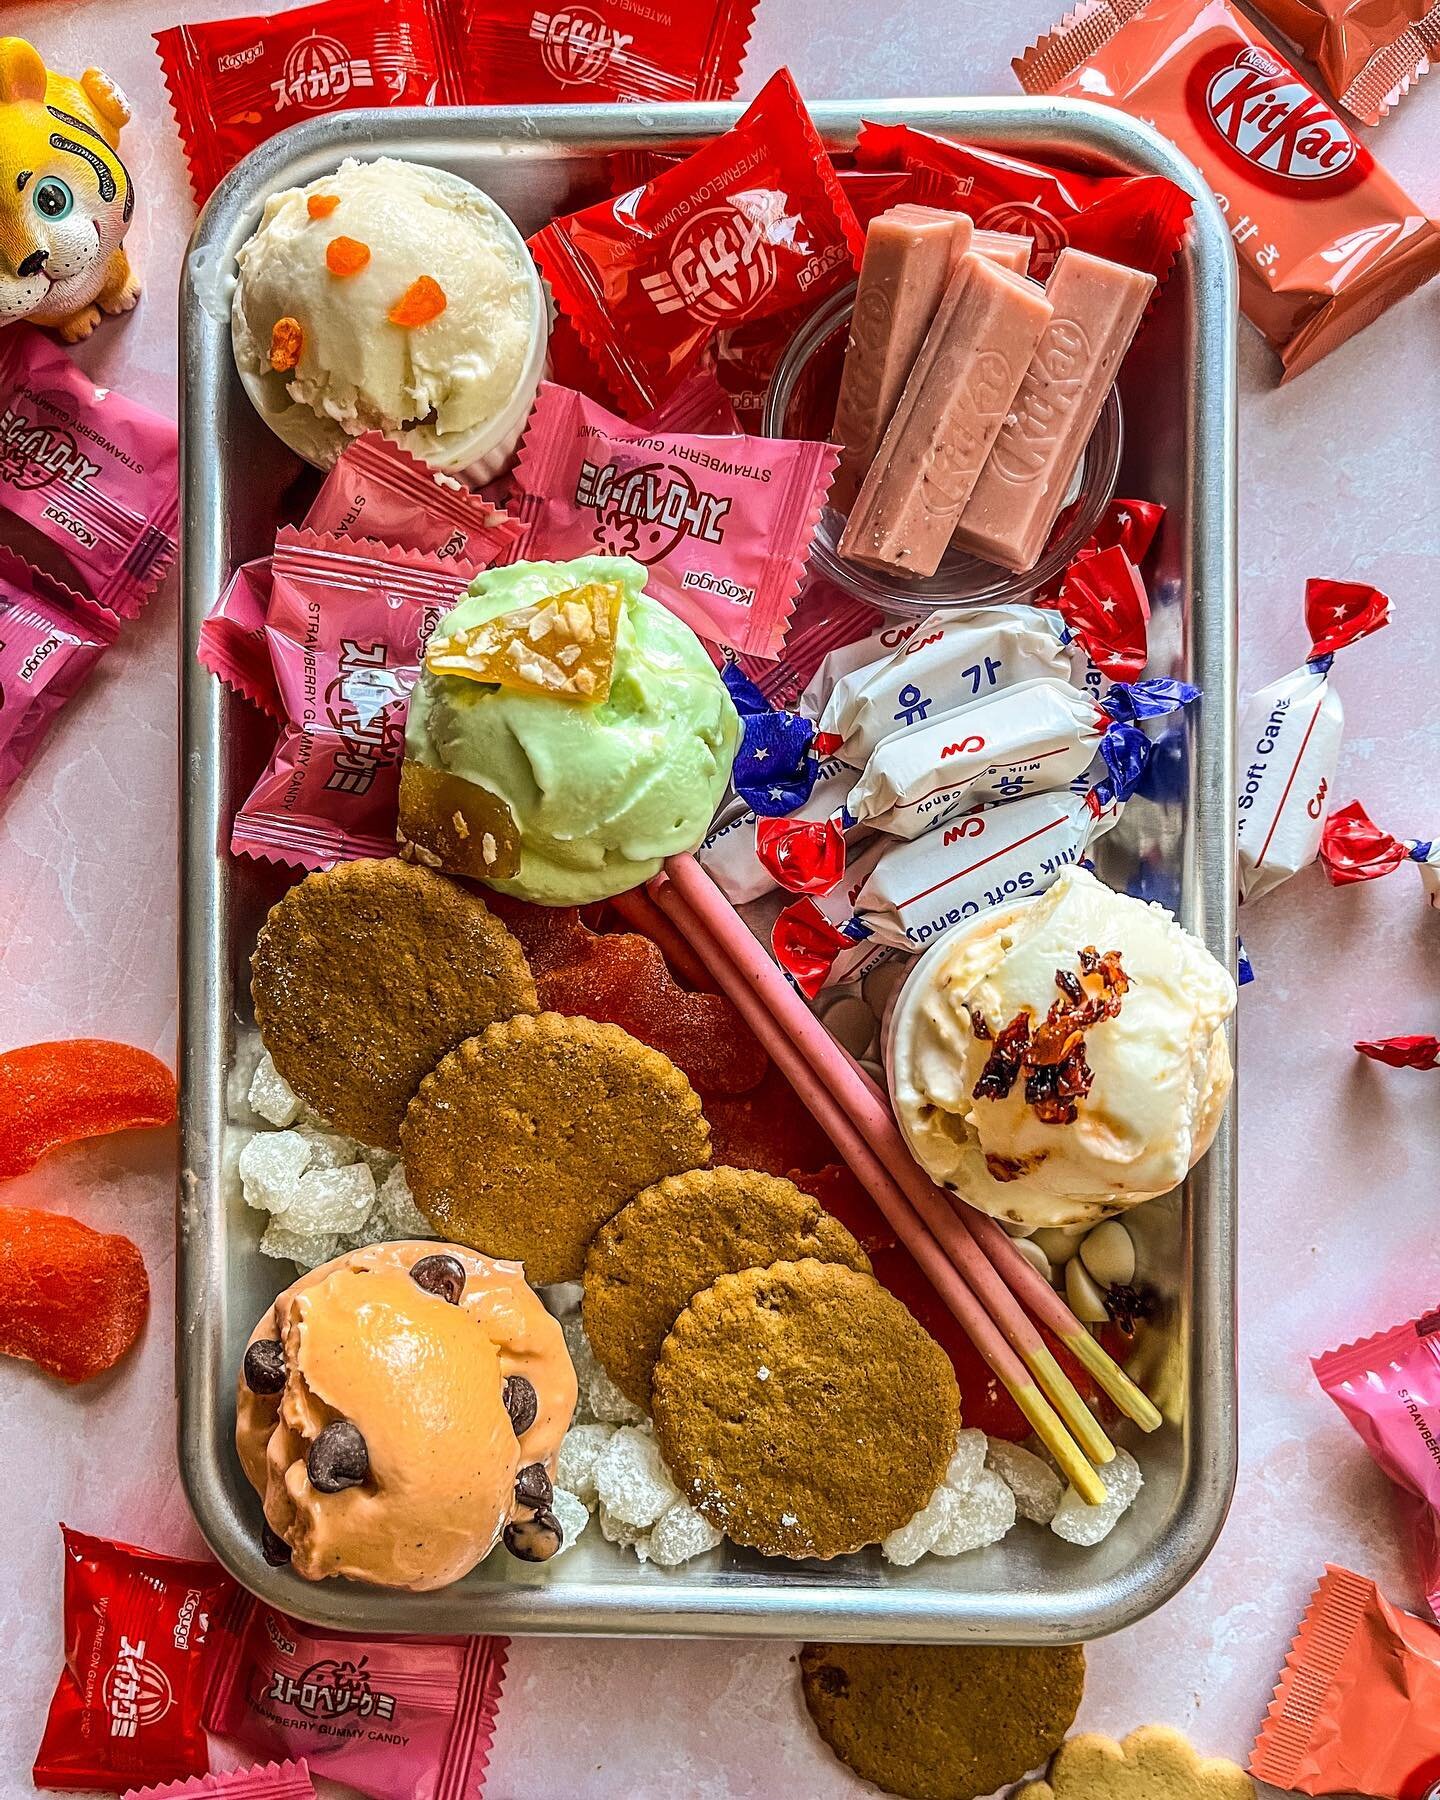 Bringing a little Monday treat board inspo to your timeline. Let&rsquo;s hear your treat board essentials in the comments. Ours is pretty obvious, but it&rsquo;s ice cream!

To assemble your own ice cream board, tune in tomorrow for a quick how-to. 
